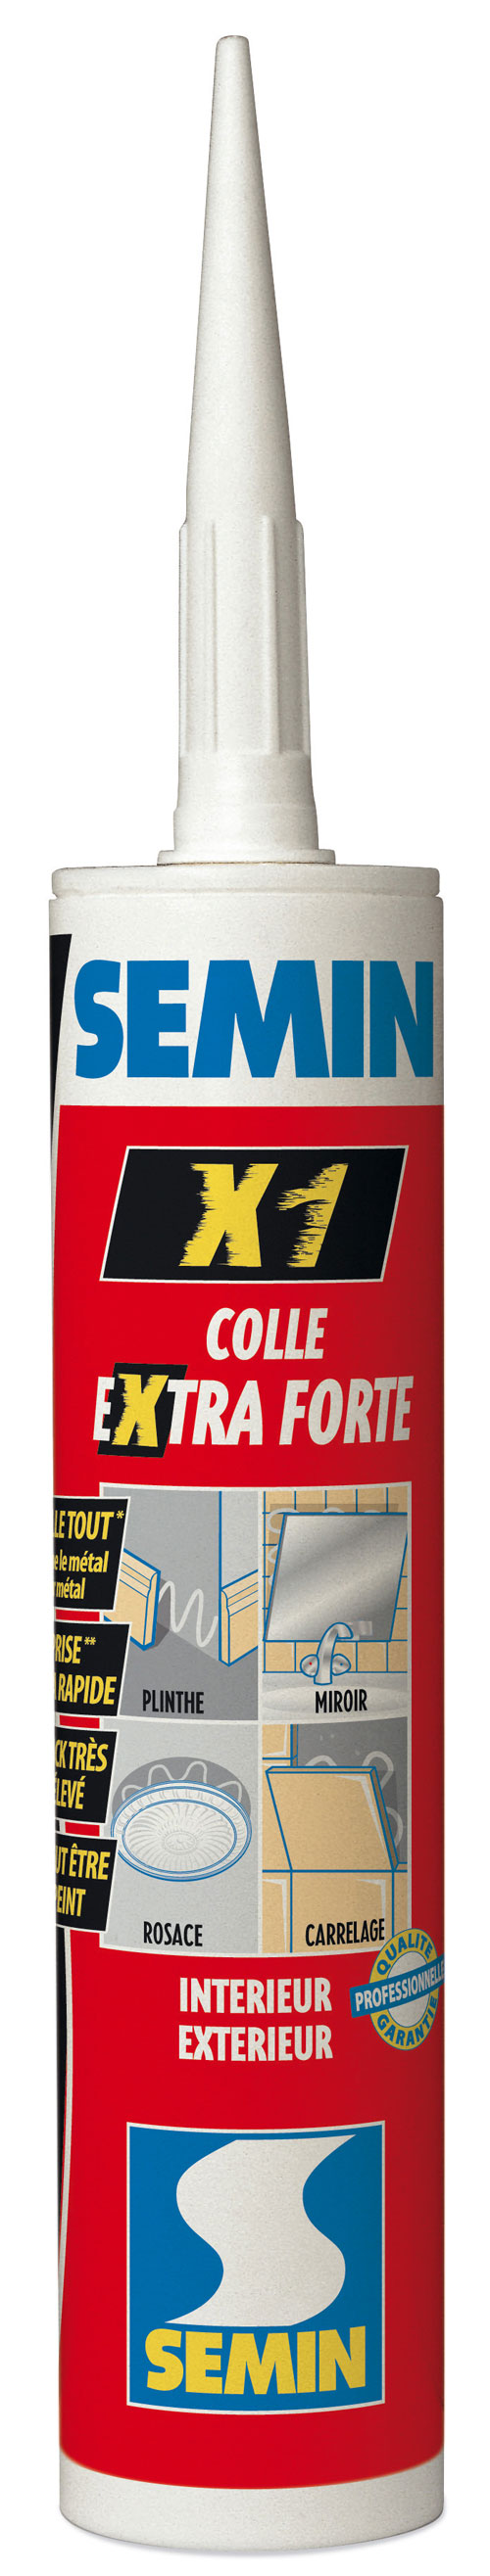 Colle a bois extra forte - Cdiscount